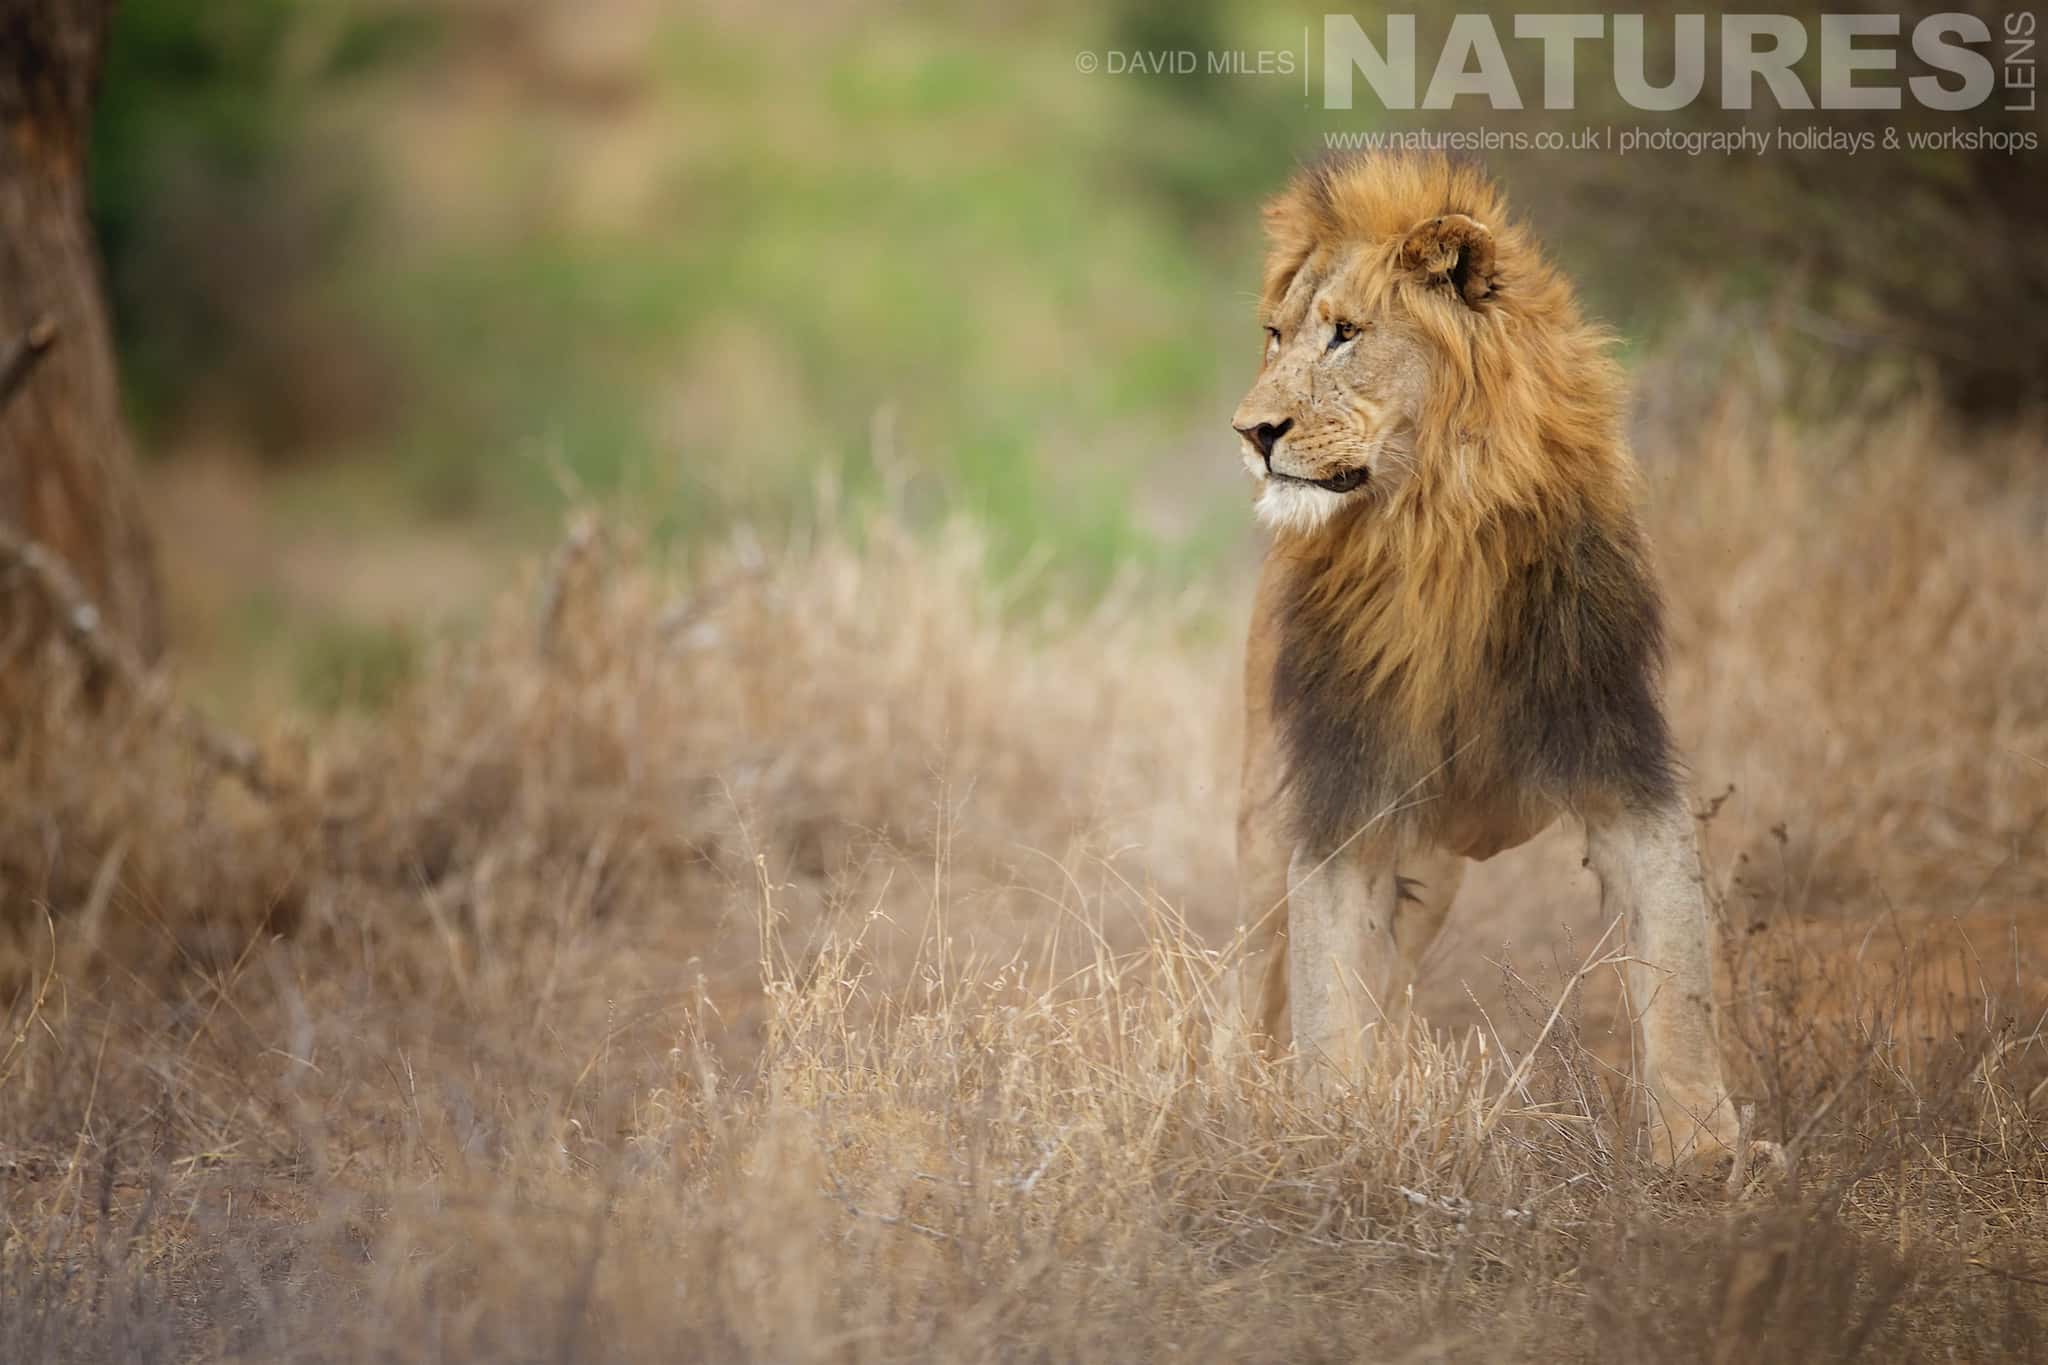 A Solo Lion Strides Through The Grass One Of The Species That Makes Up The Awe Inspiring Wildlife Of Zimanga